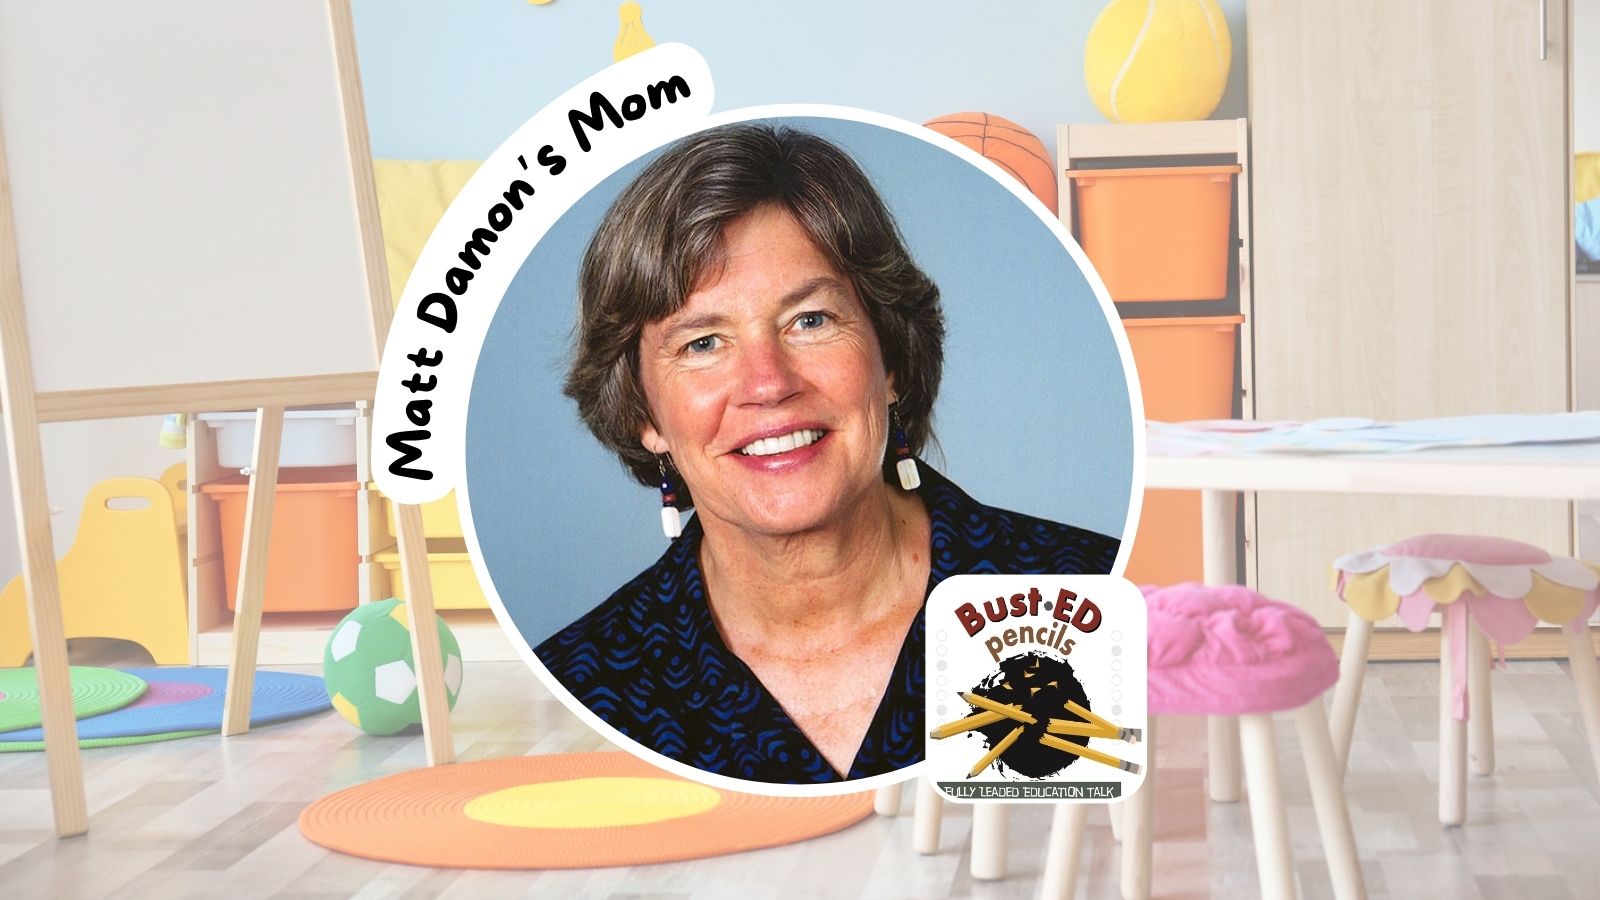 Bringing joy and learning to preschoolers through science: A discussion with Matt Damon’s mom